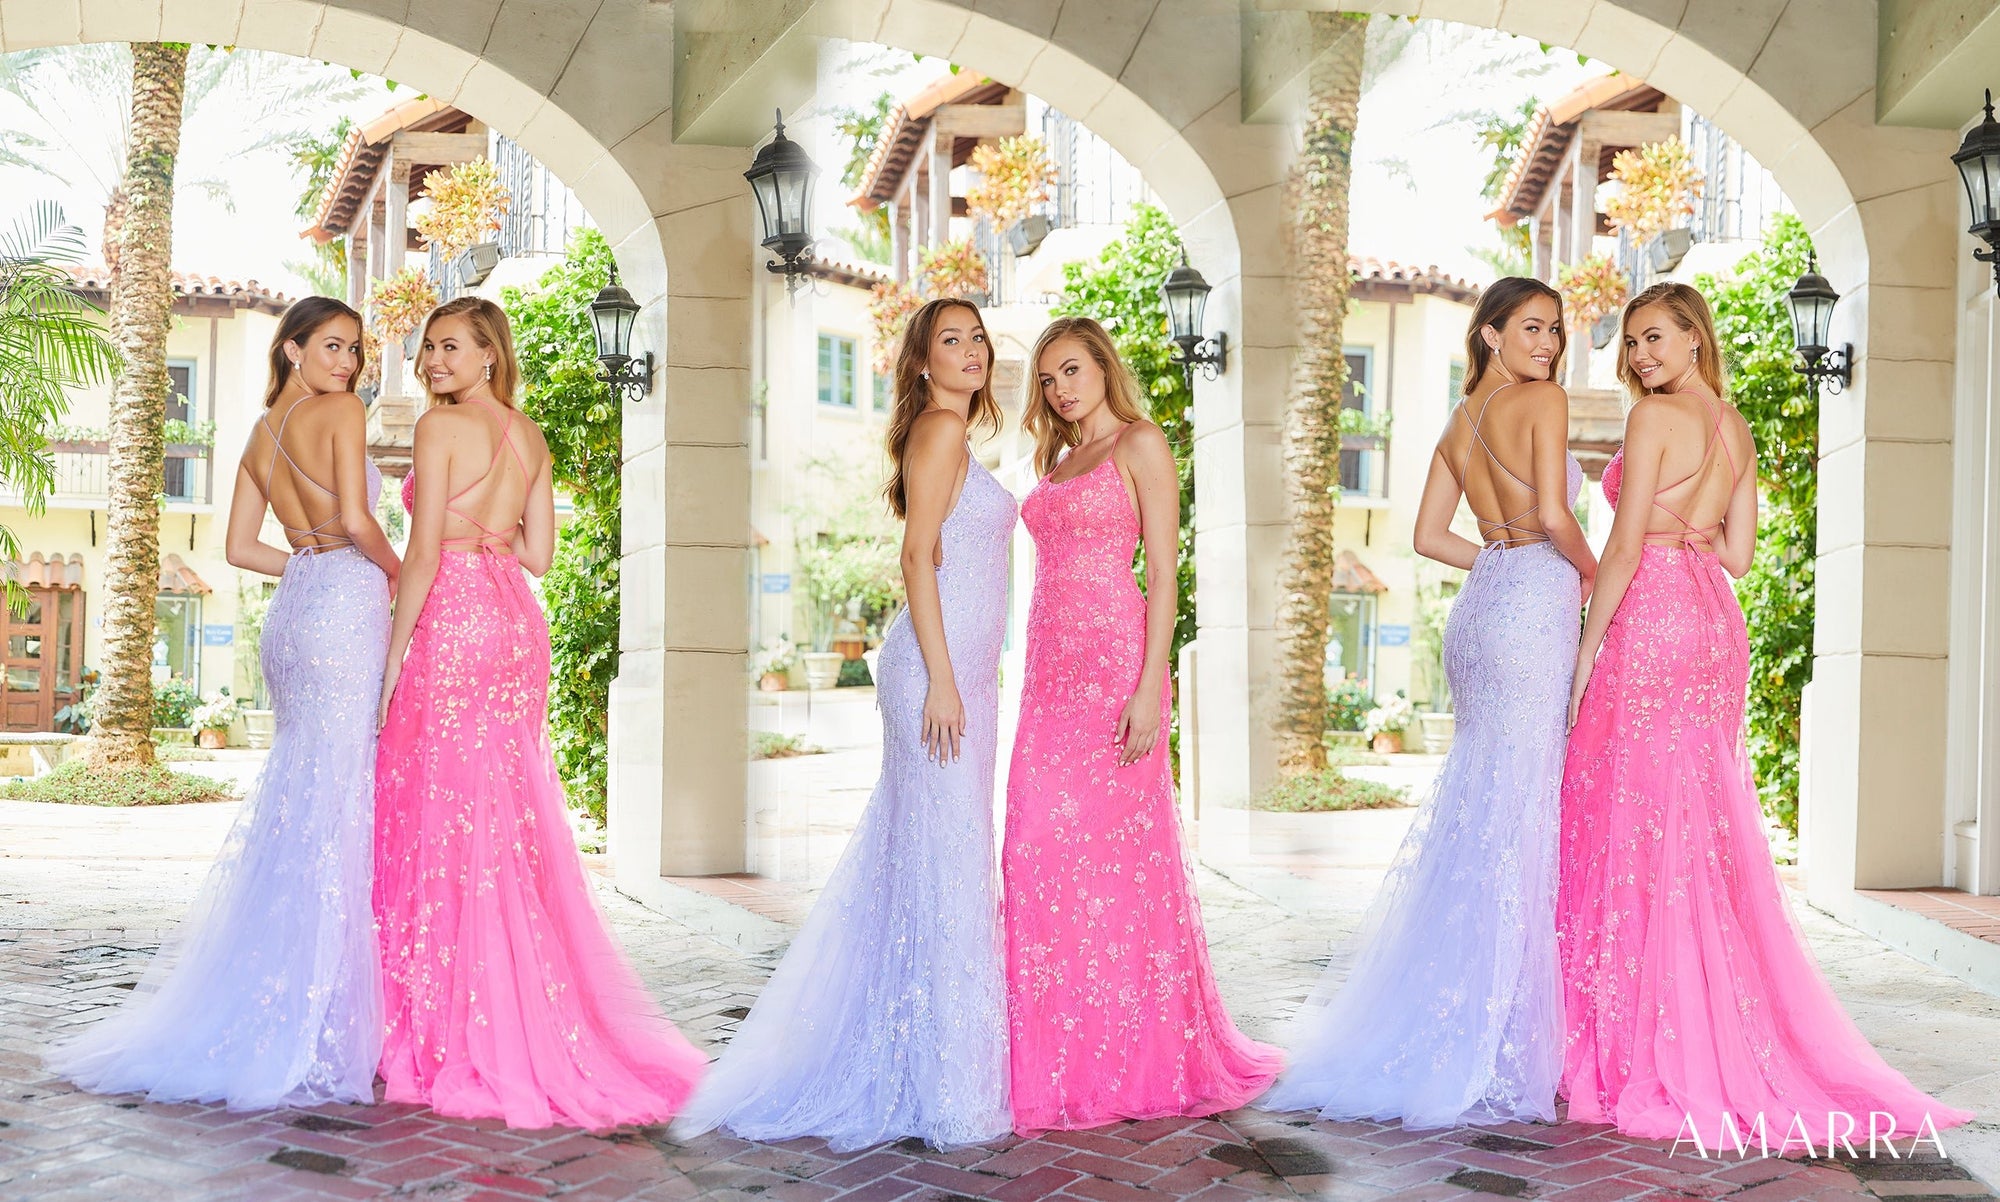 The Different Types of Prom Dresses